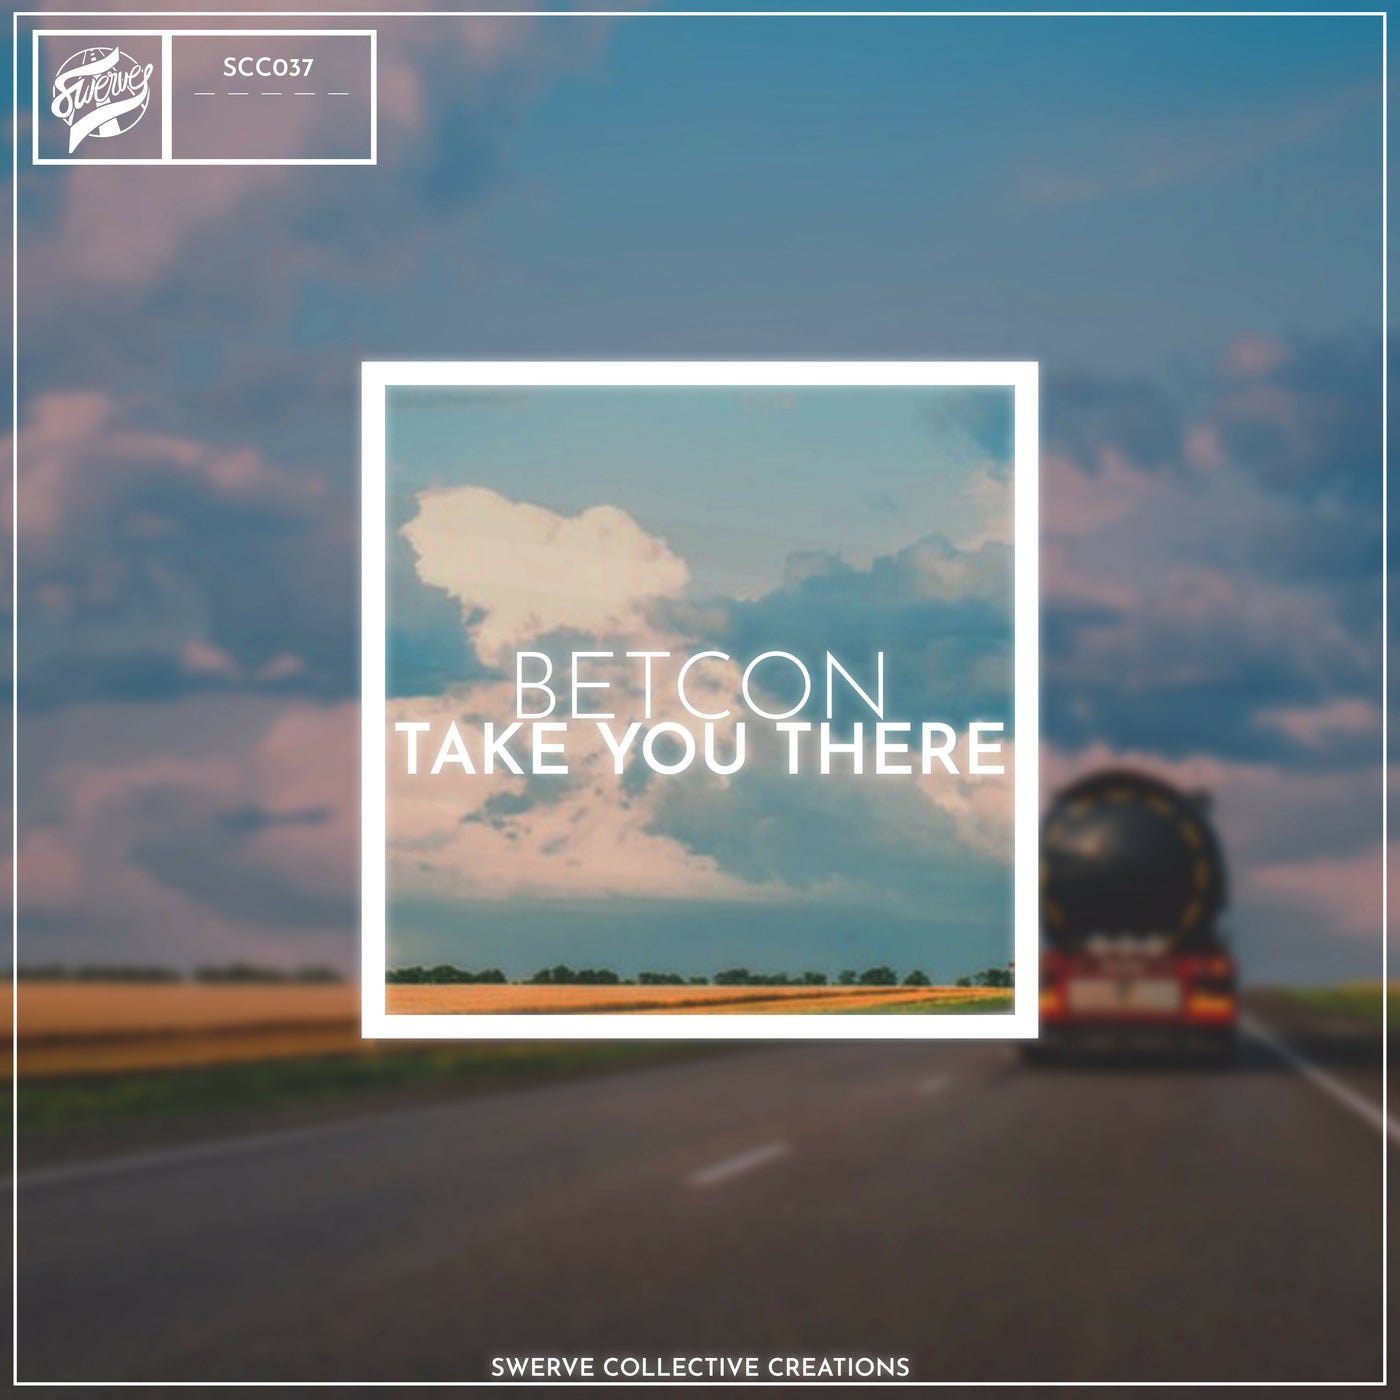 Take You There (Extended Mix)